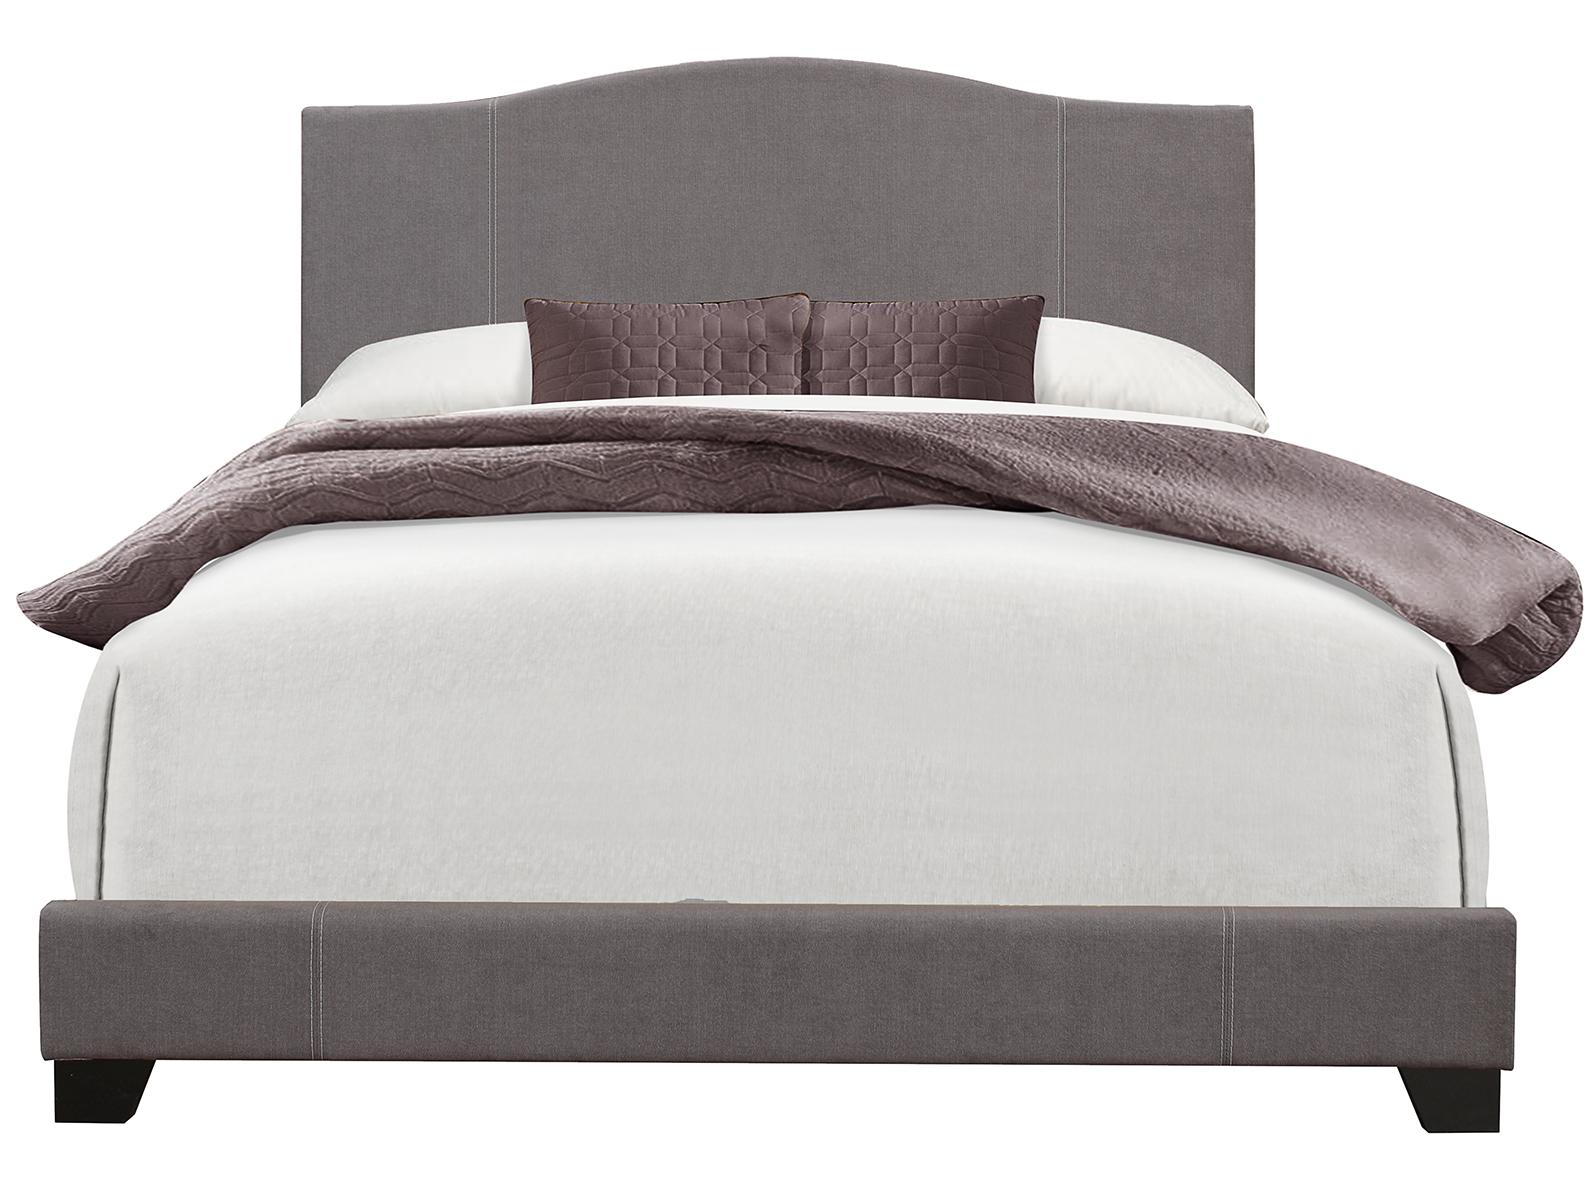 Pulaski ACH All-In-One Queen Modified Camel Back Upholstered Bed in Grey